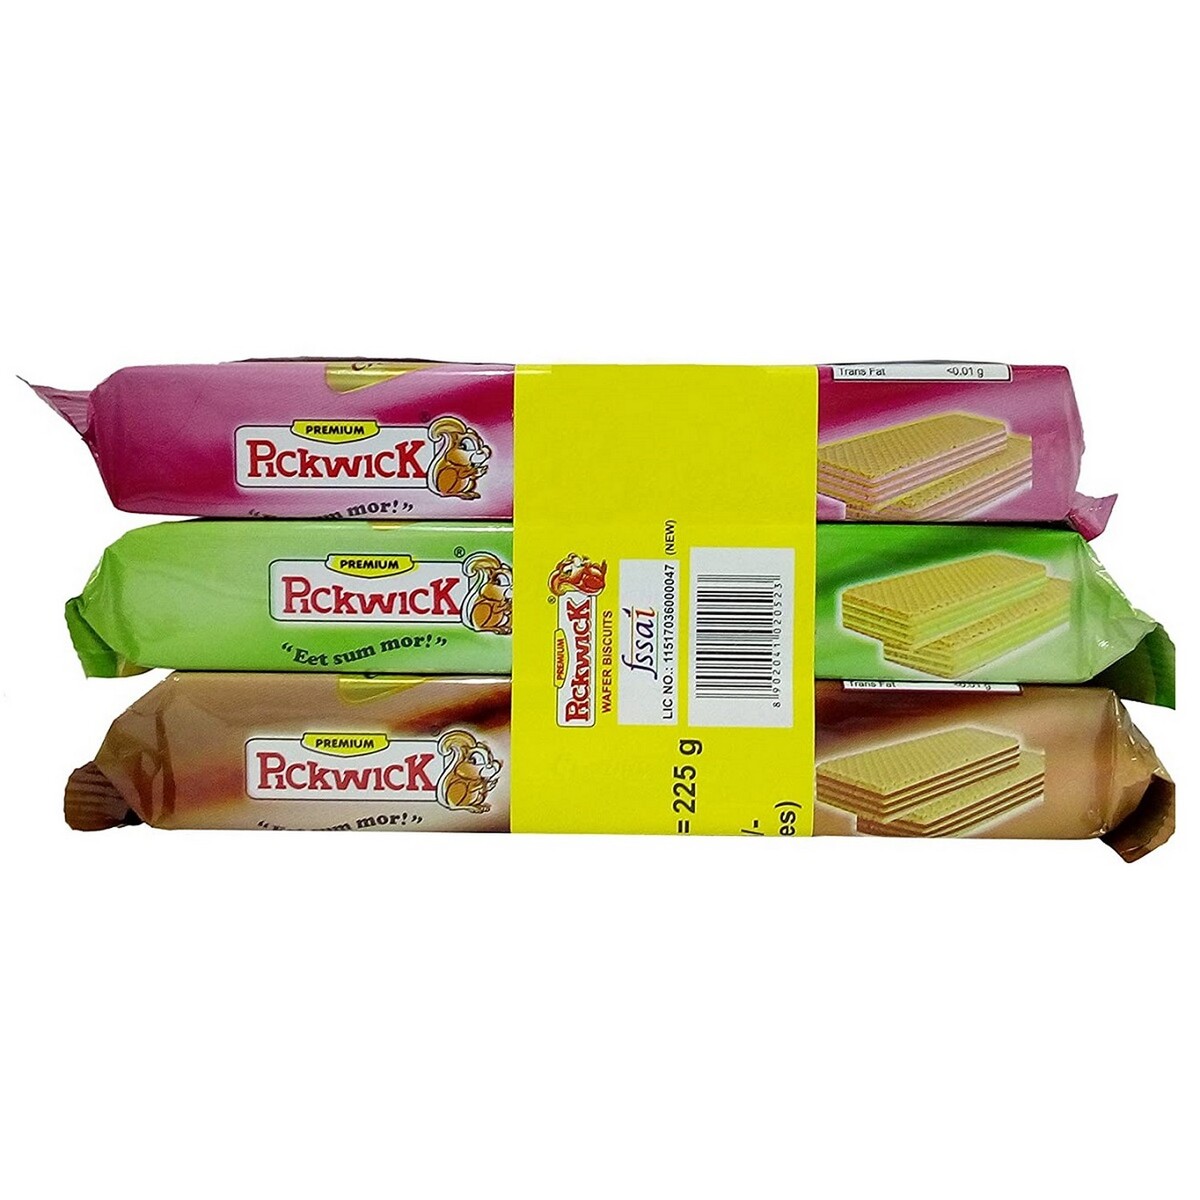 PickWick Wafer Biscuit ( 3 Pack of 75 Gm each )